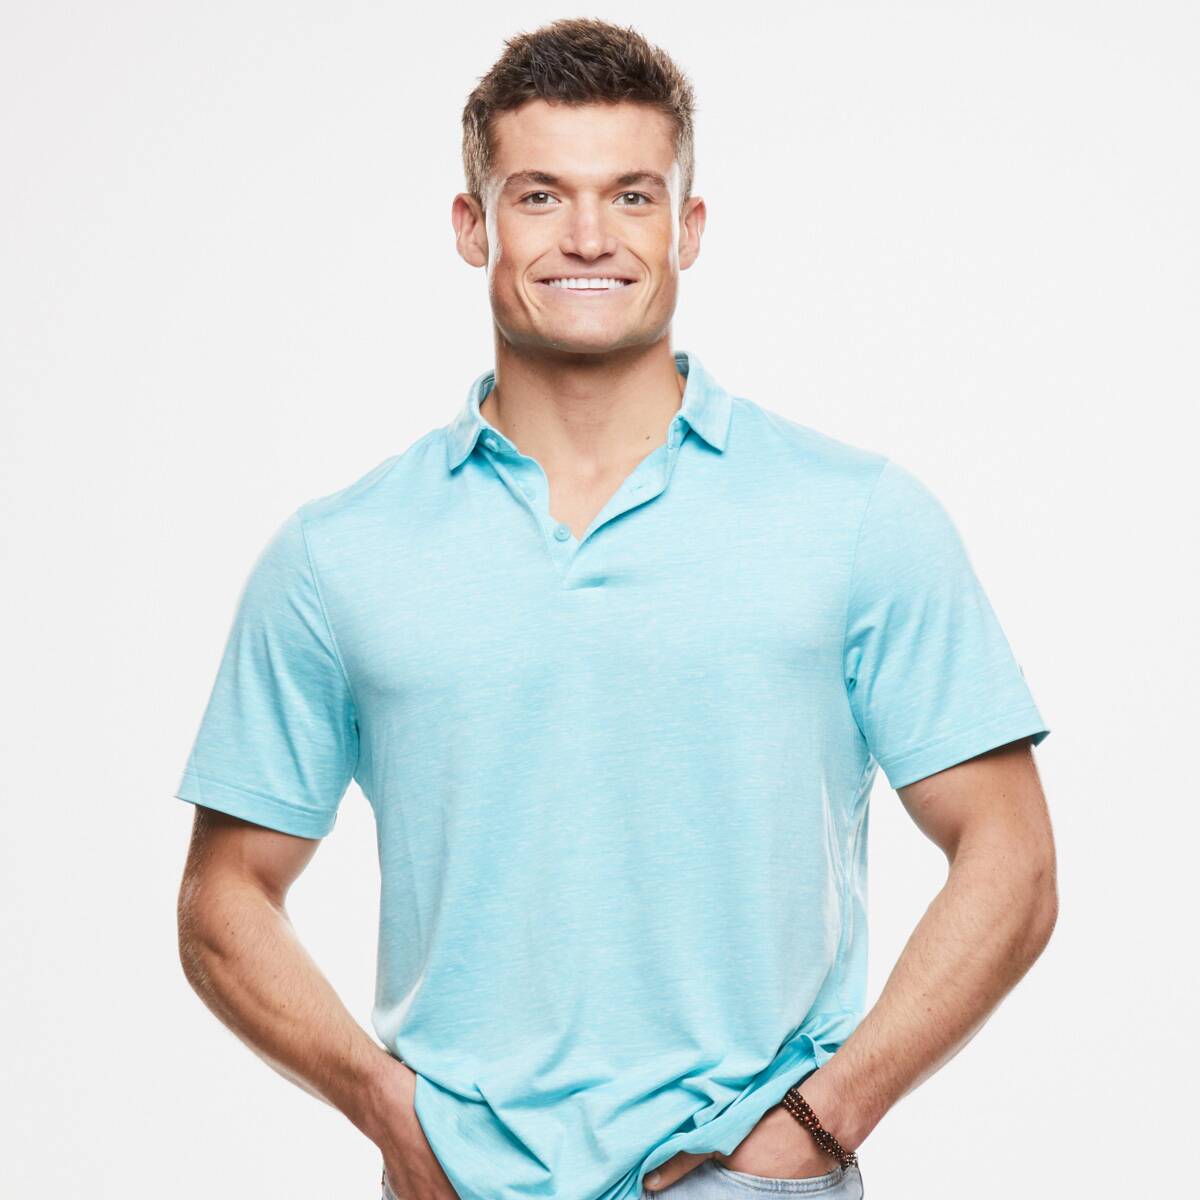 Big Brother's Jackson Michie Says He Was Secretly Recovering From Drug Addiction on the Show